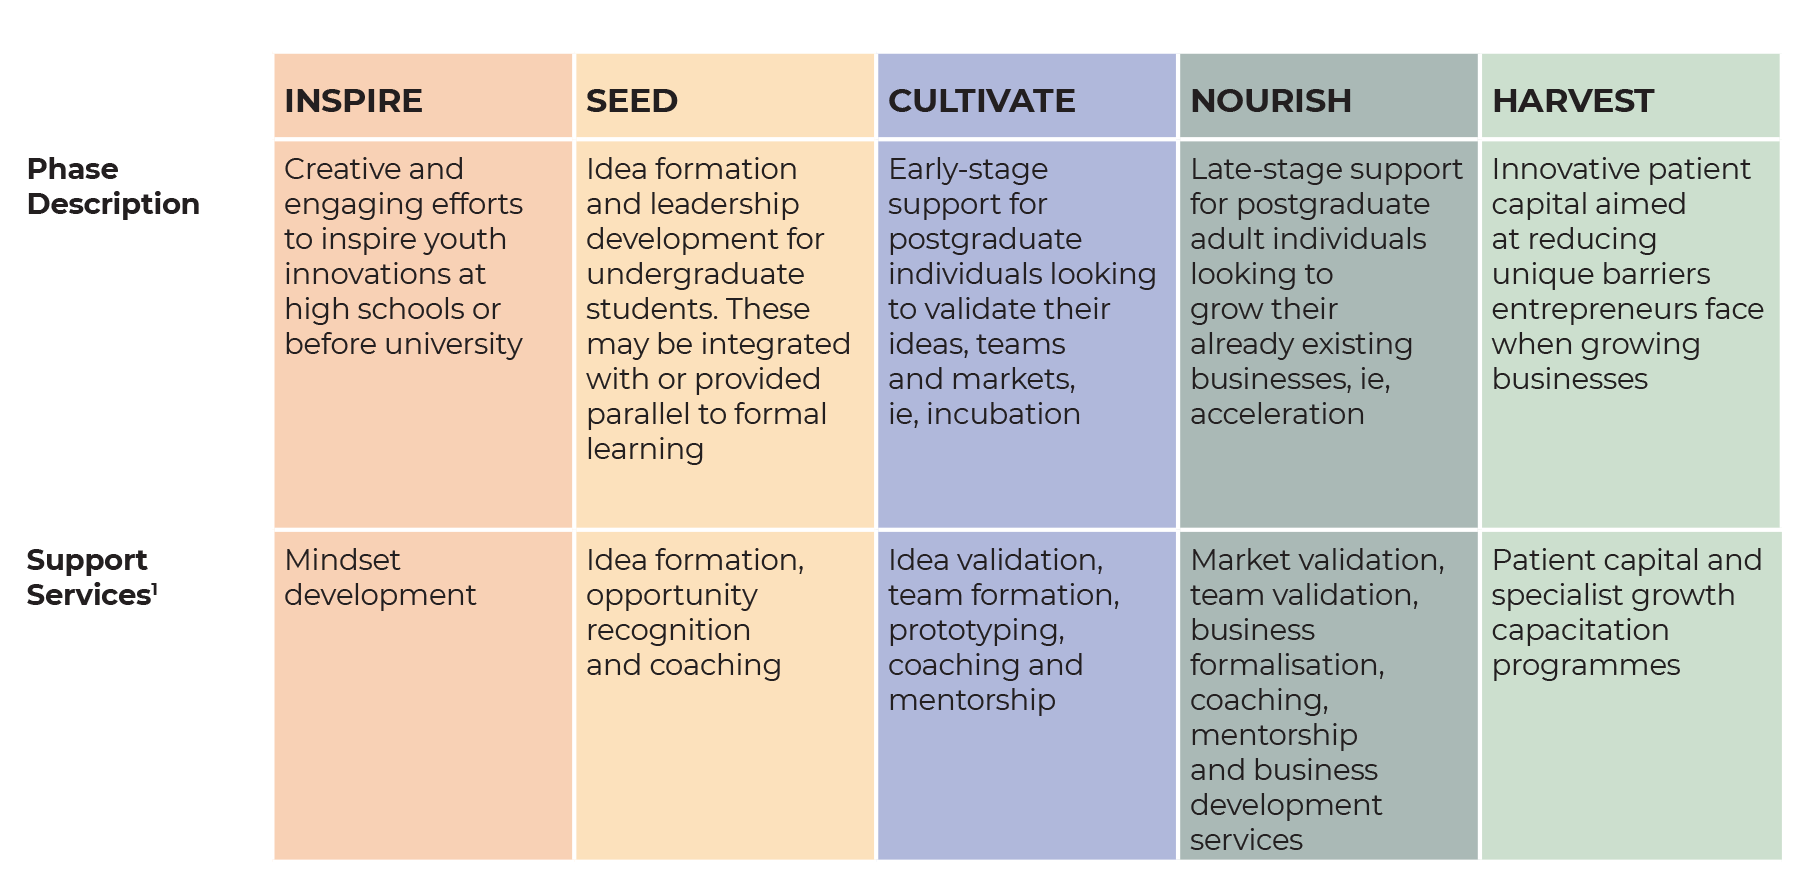 A description of entrepreneurship development phases and related support services